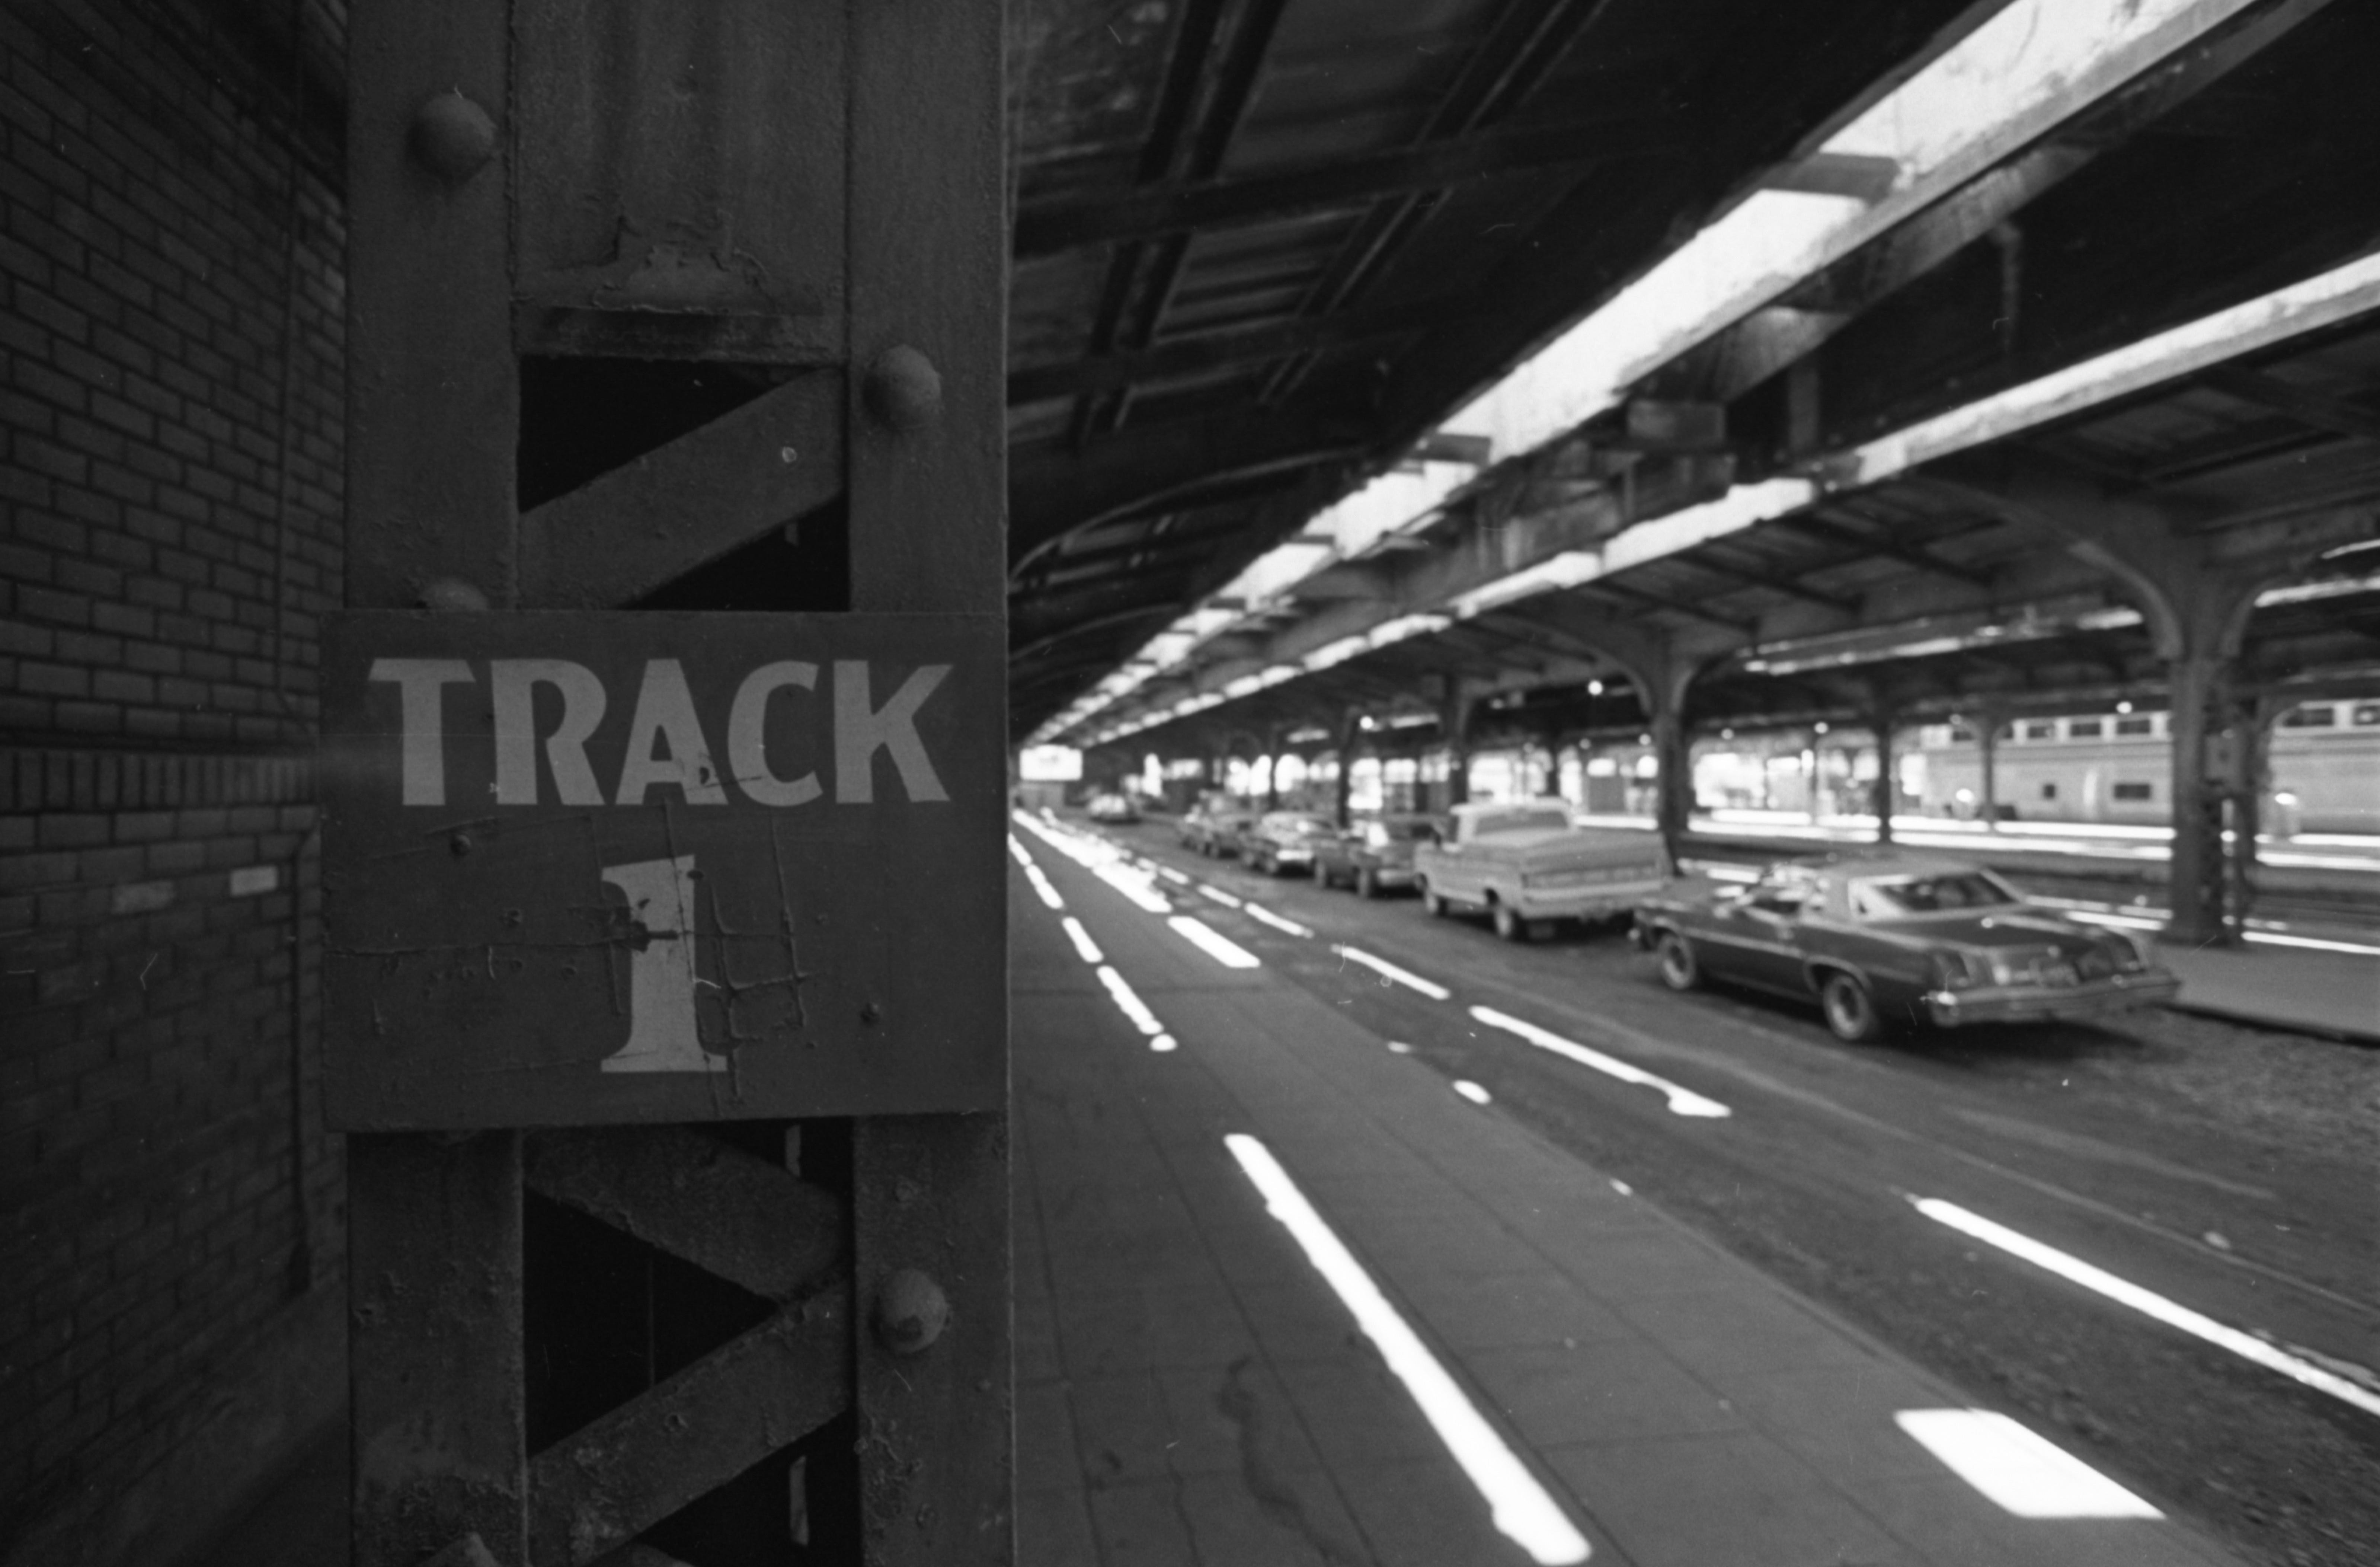 A day after Amtrak closed Michigan Central Depot for good on Jan. 5, 1988, The Detroit News ran an editorial with the headline, "Good Riddance to Amtrak." "There's no point subsidizing dinosaurs like Amtrak and the Michigan Central Depot," the editorial read as it noted cars and planes were the preferred mode of transportation.